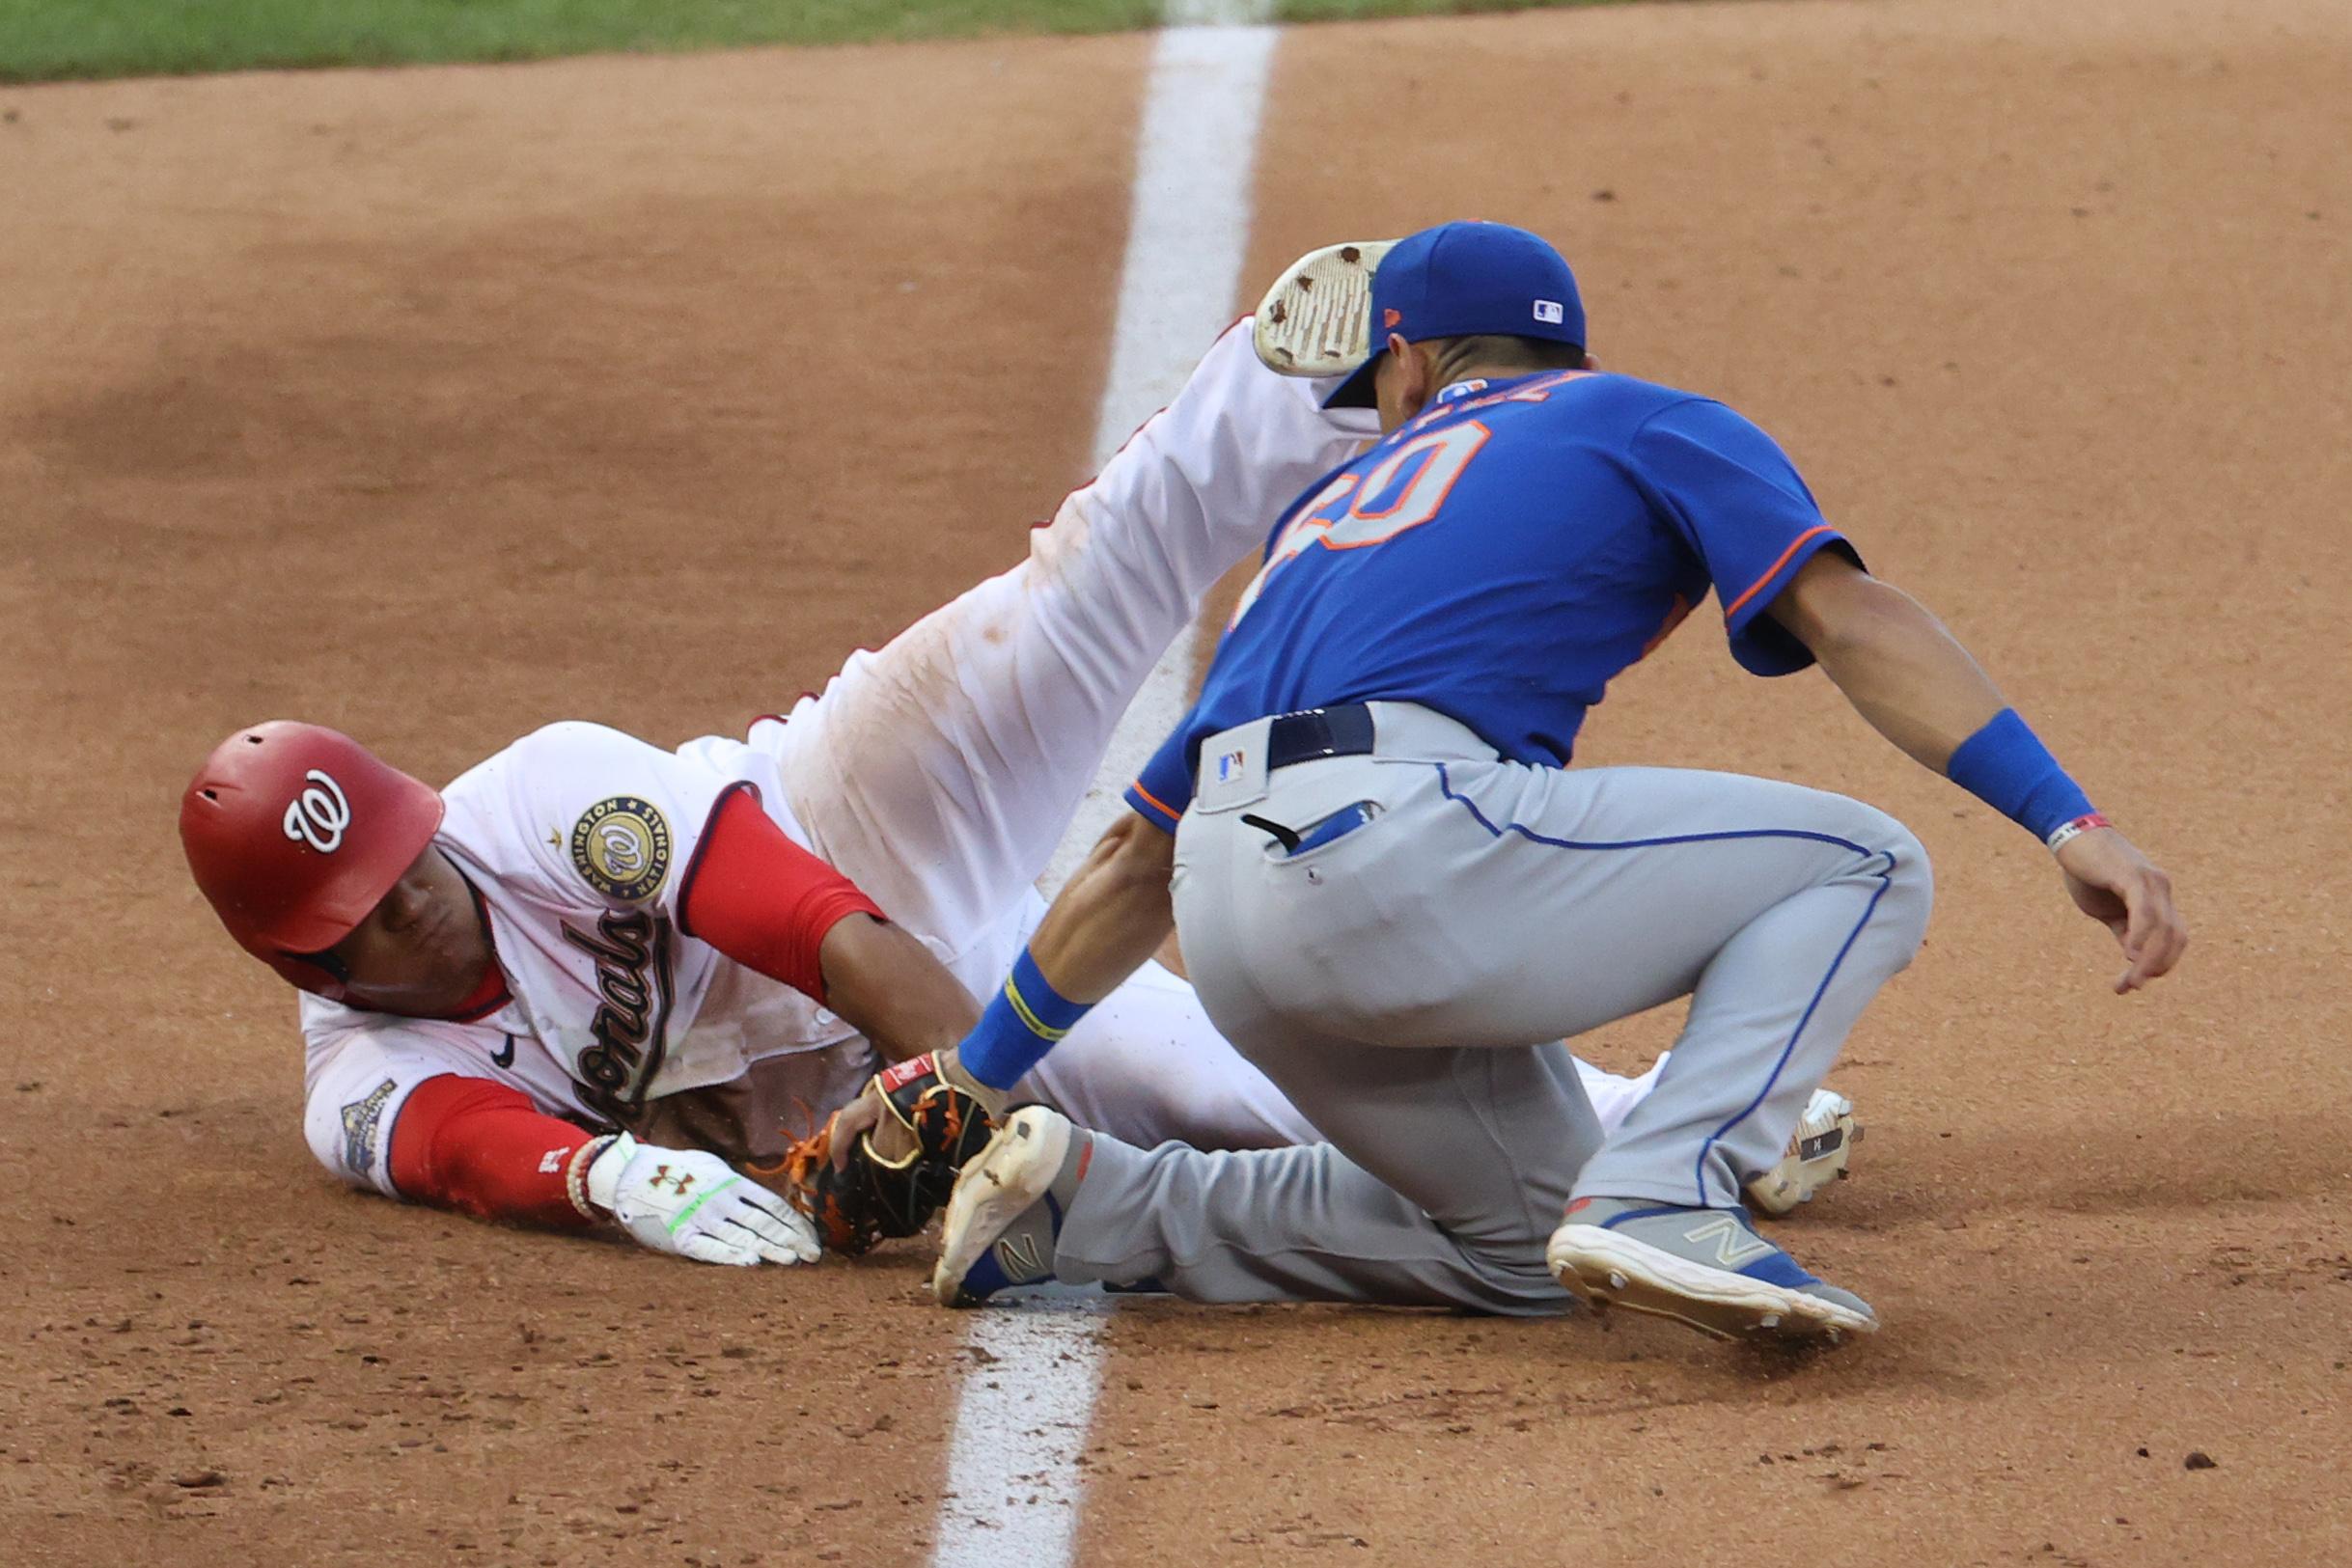 Washington Nationals left fielder Juan Soto (22) is tagged out at third base by New York Mets shortstop Andres Gimenez (60) in the fourth inning at Nationals Park. / Geoff Burke- USA TODAY Sports